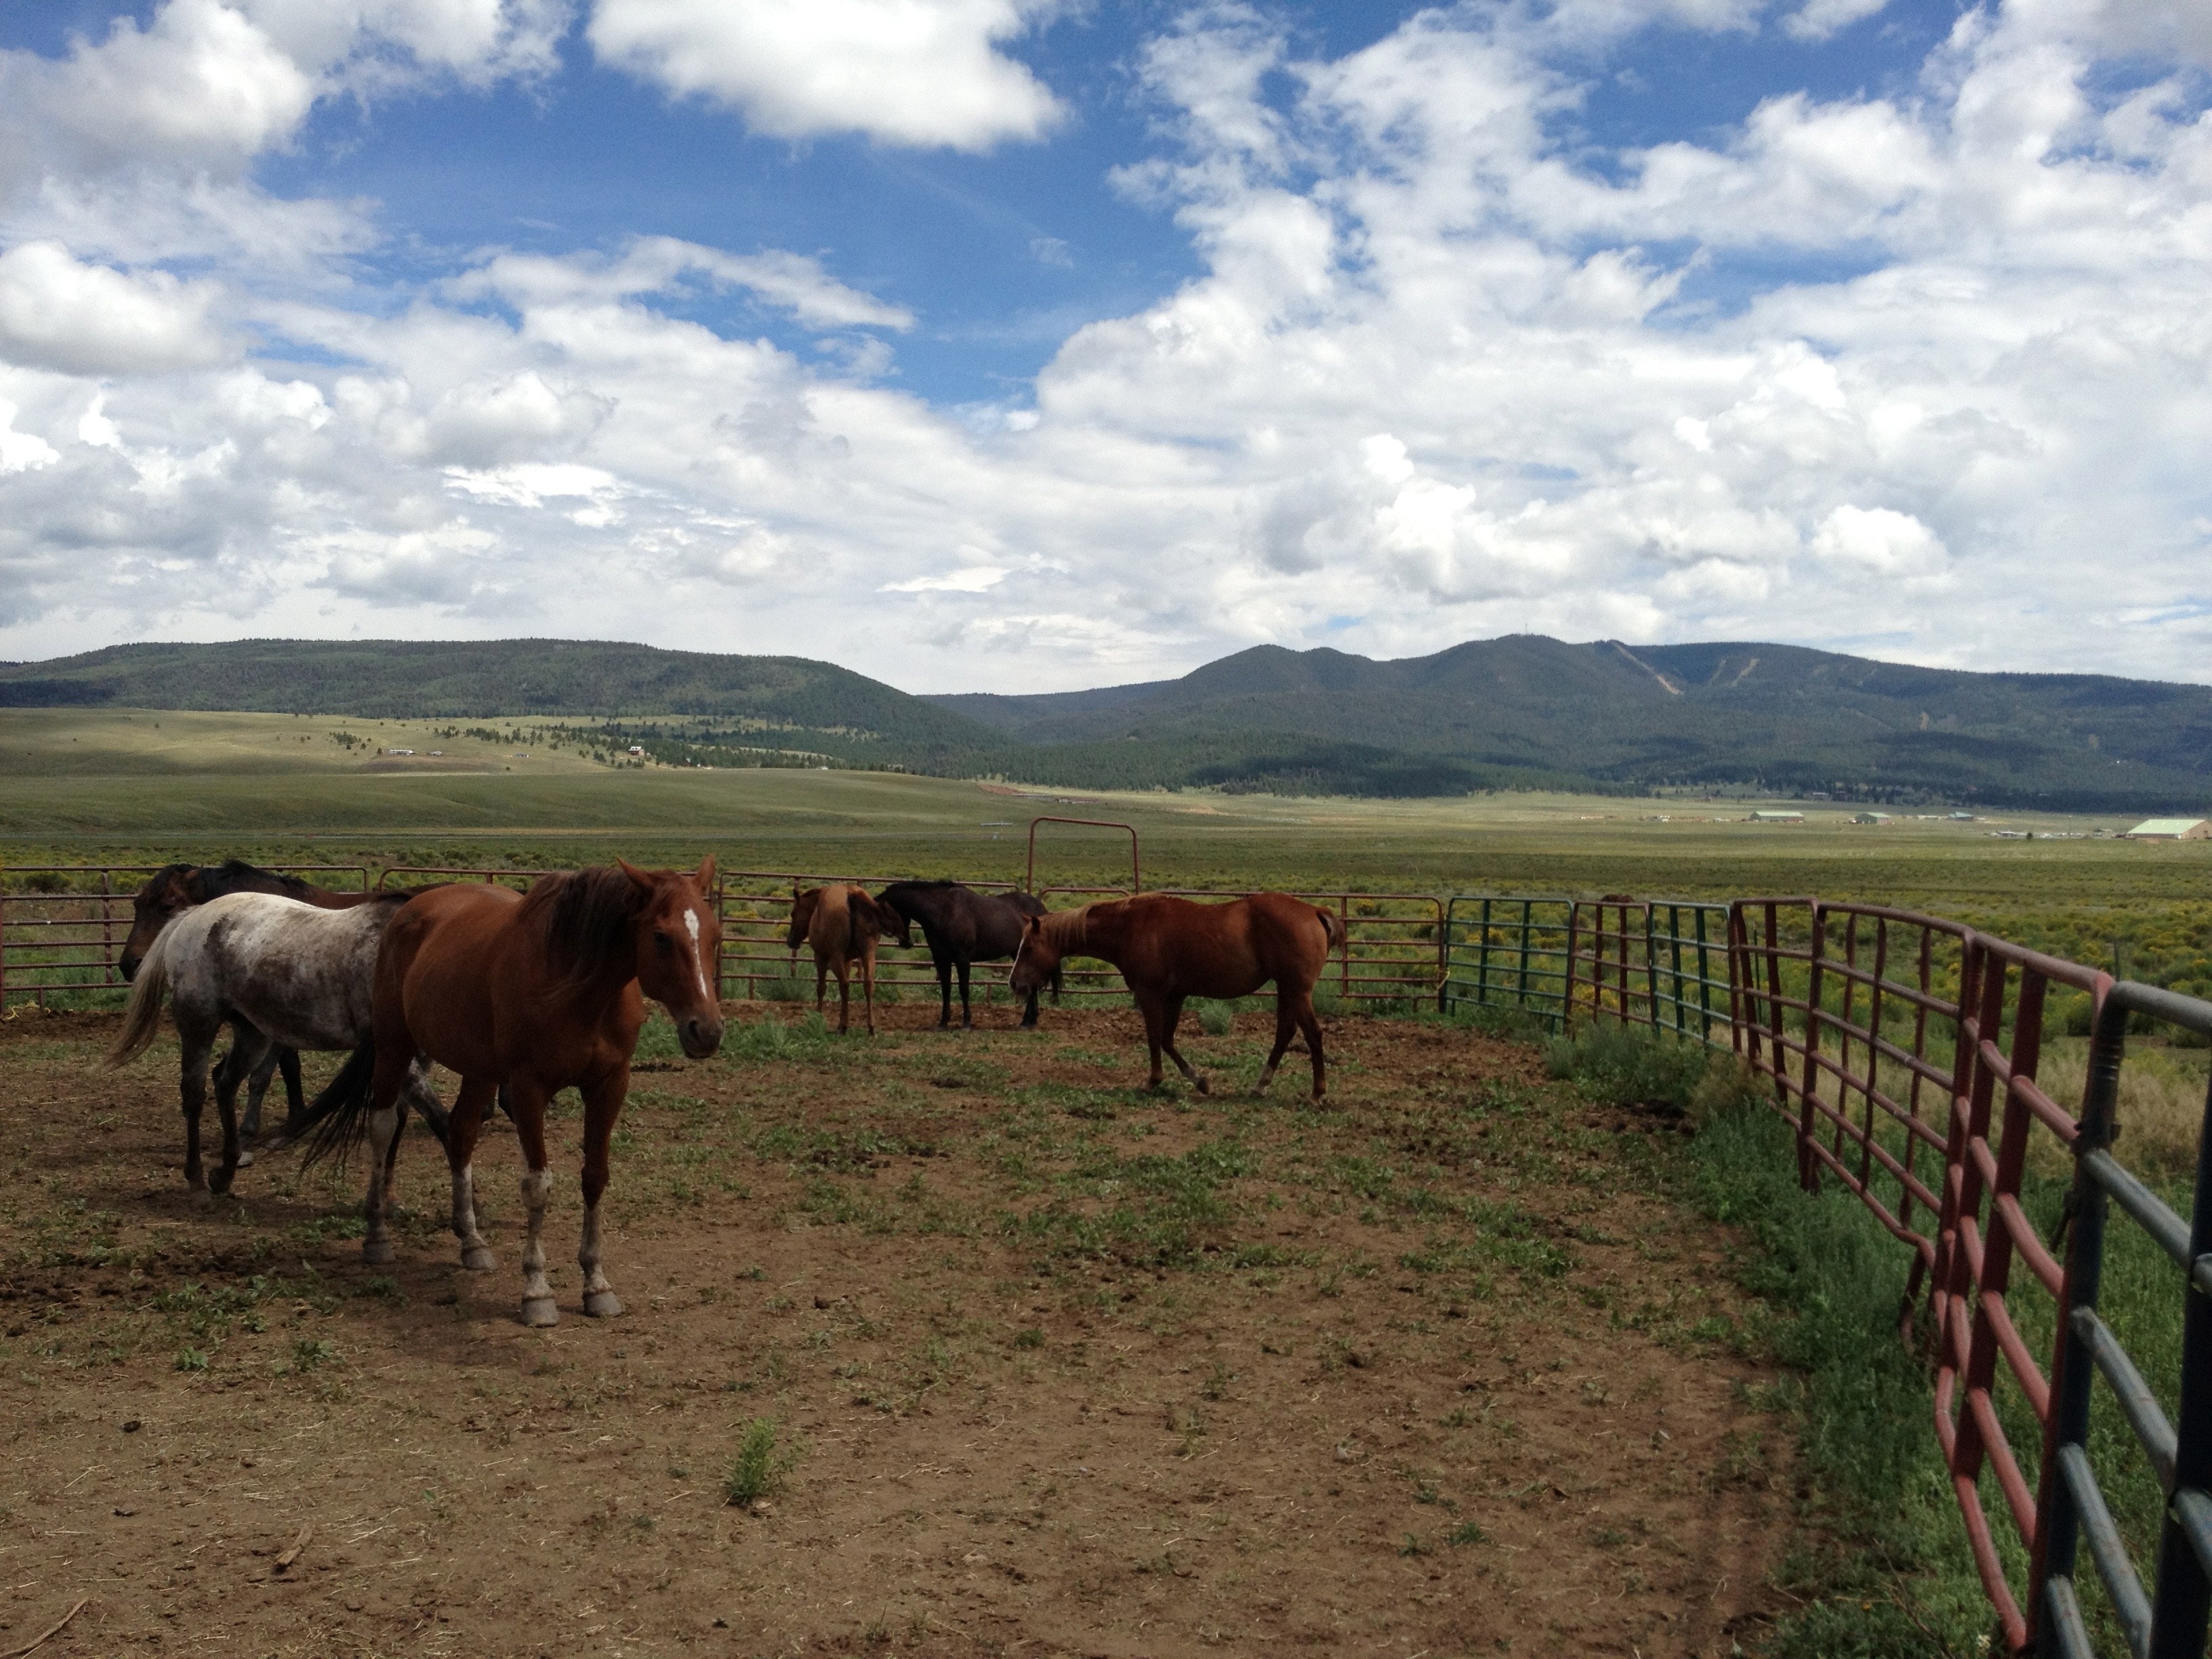 herd of horses inside a controlled area under blue skies